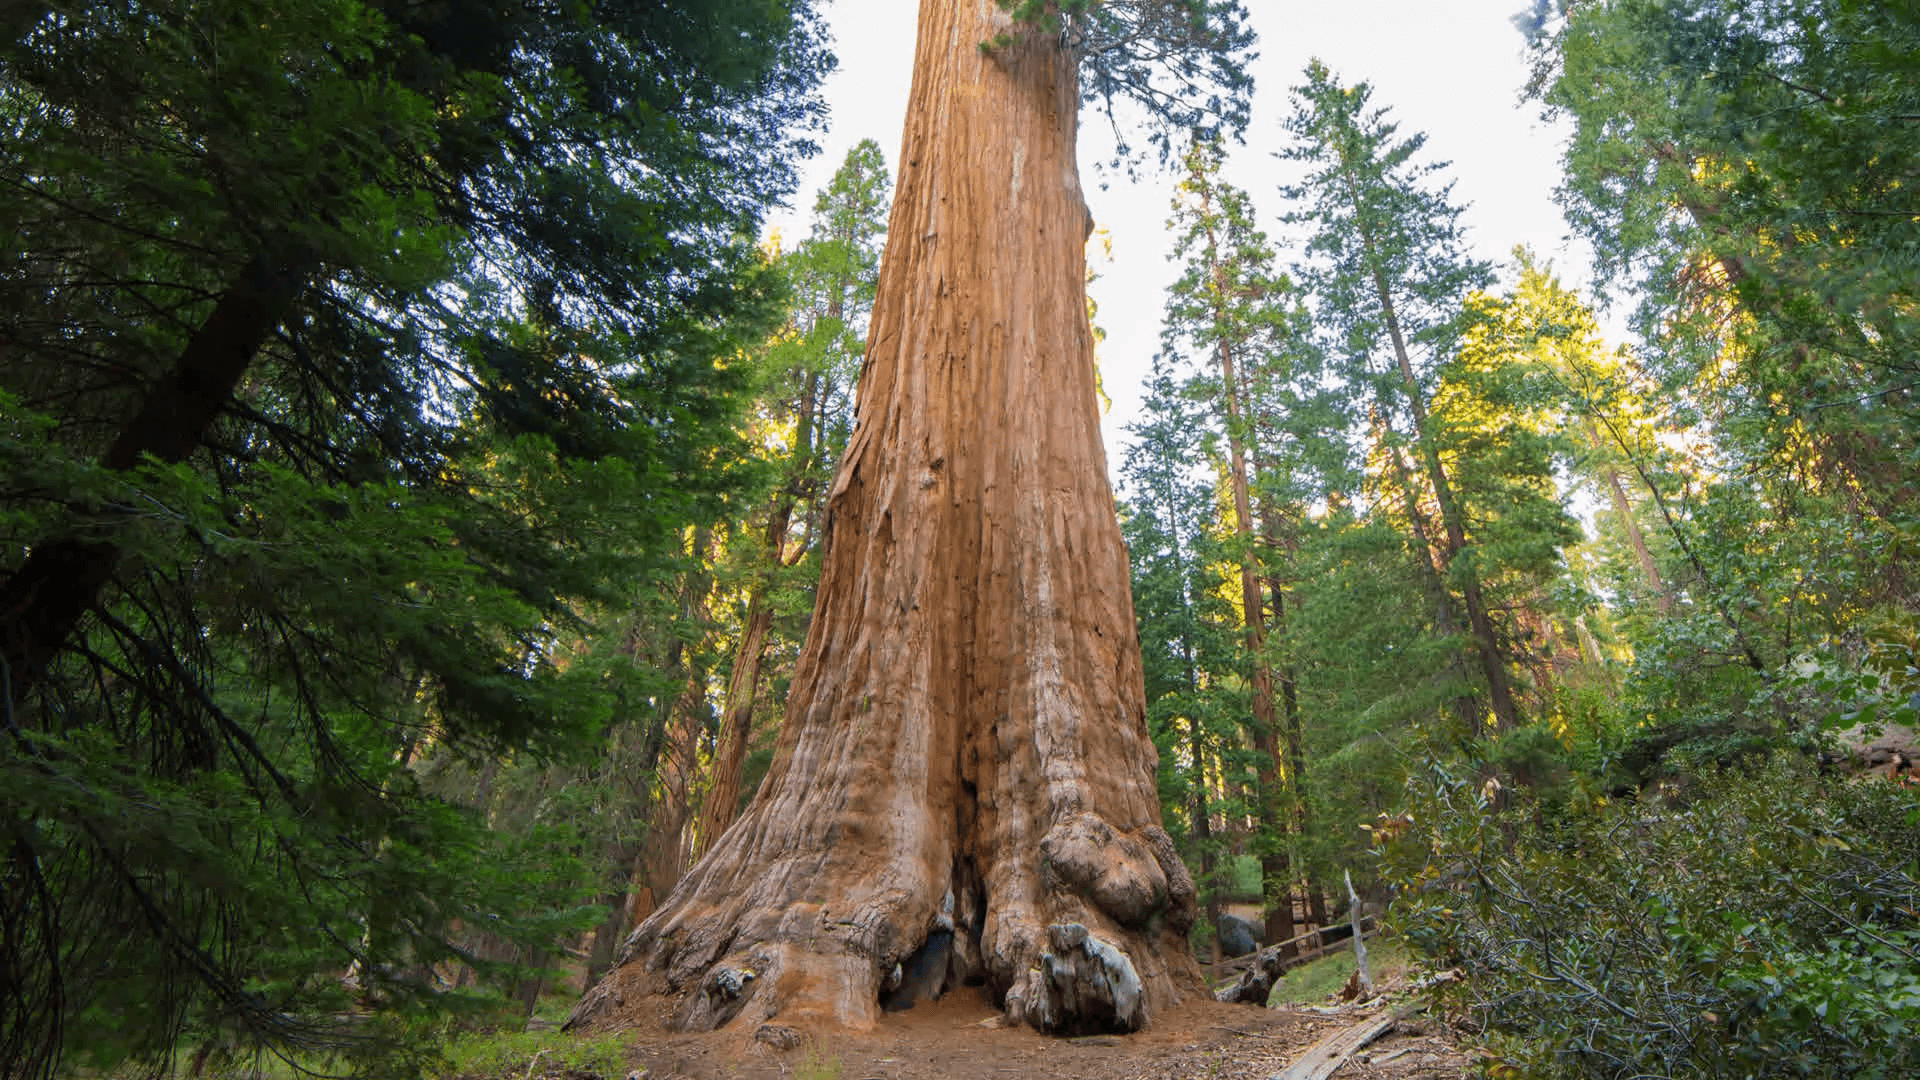 Timelapse of General Grant Tree at Dusk in Sequoia National Park